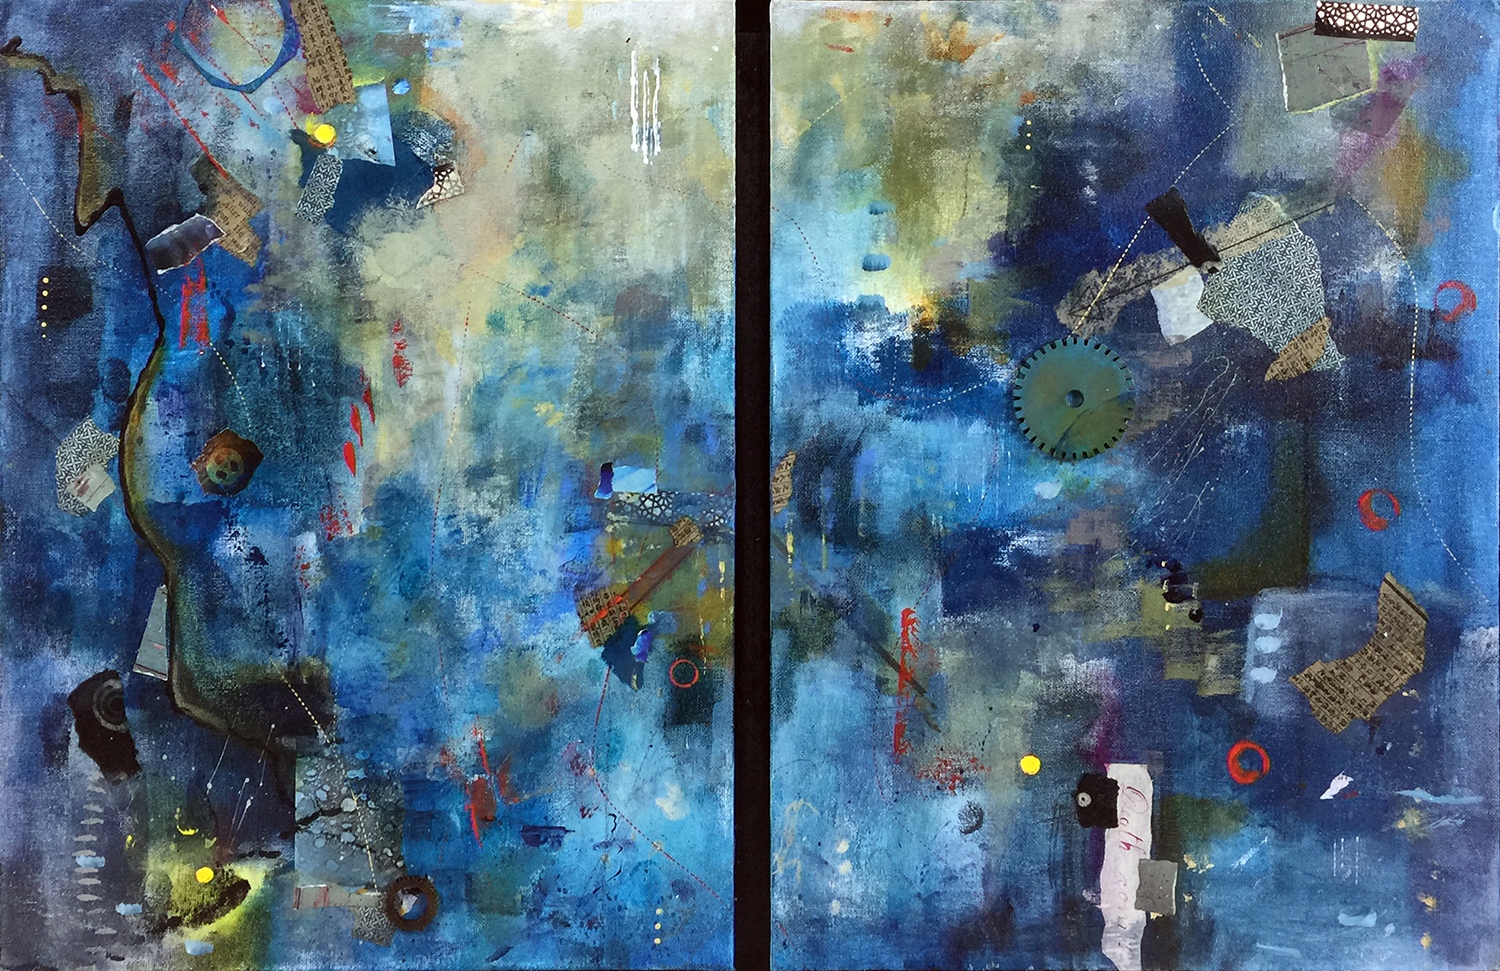  Robin Colodzin,  But most like chaos III , Acrylic, found paper, pencil, pastel, wood gear on canvas panels, each panel 16x12 